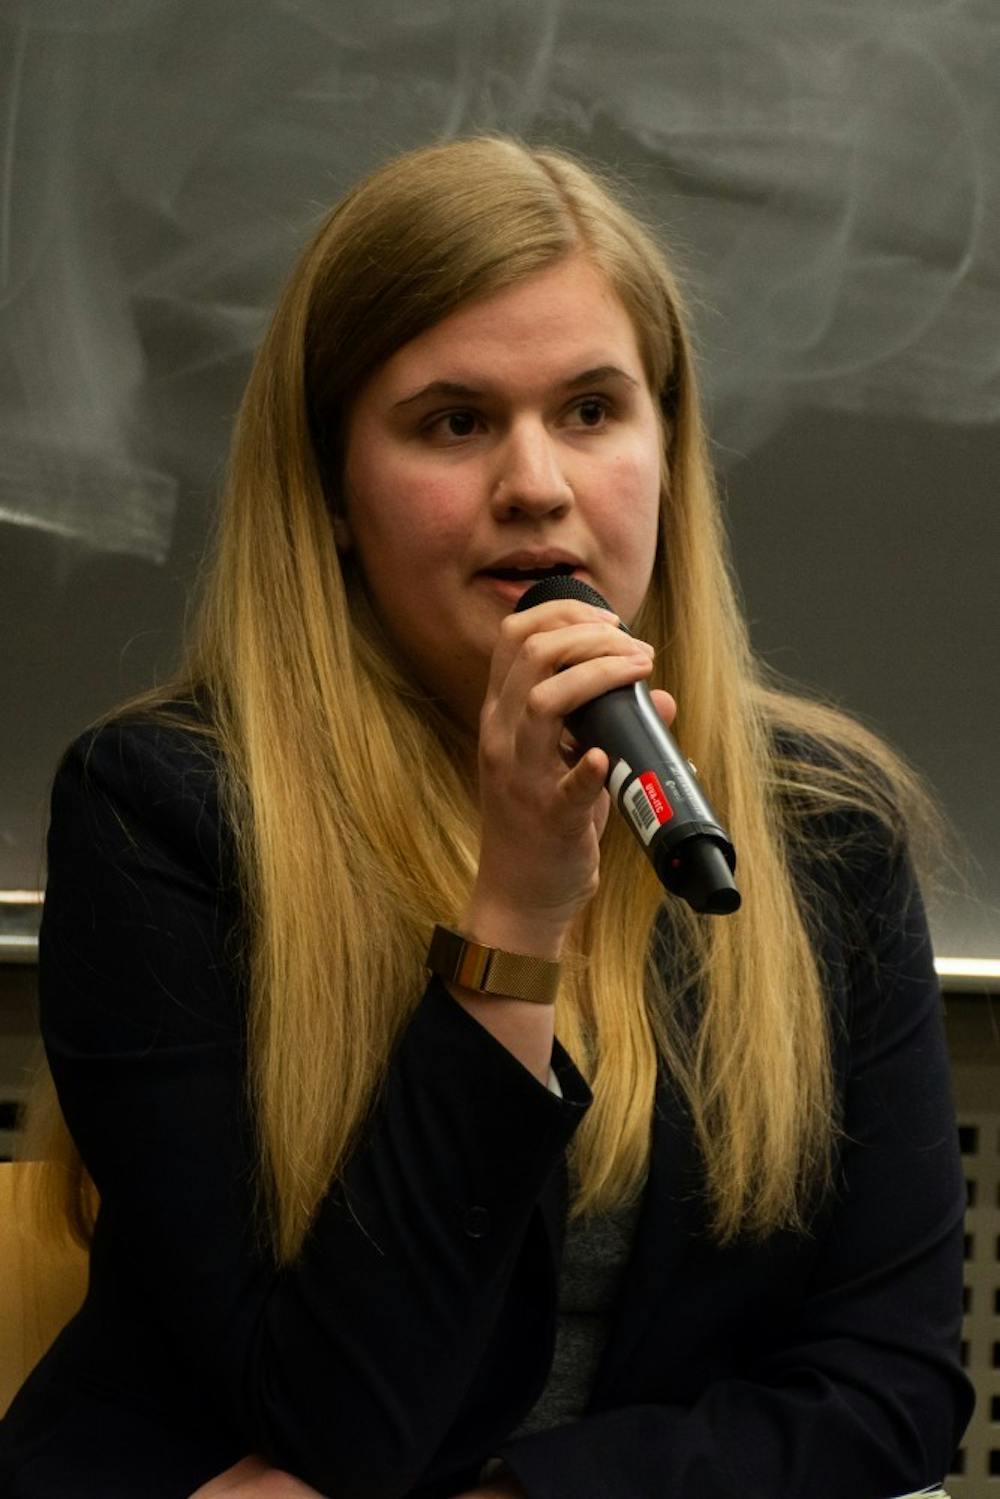 Brasacchio has served on Student Council since her first year at the University and previously served as the chair of the Representative Body.